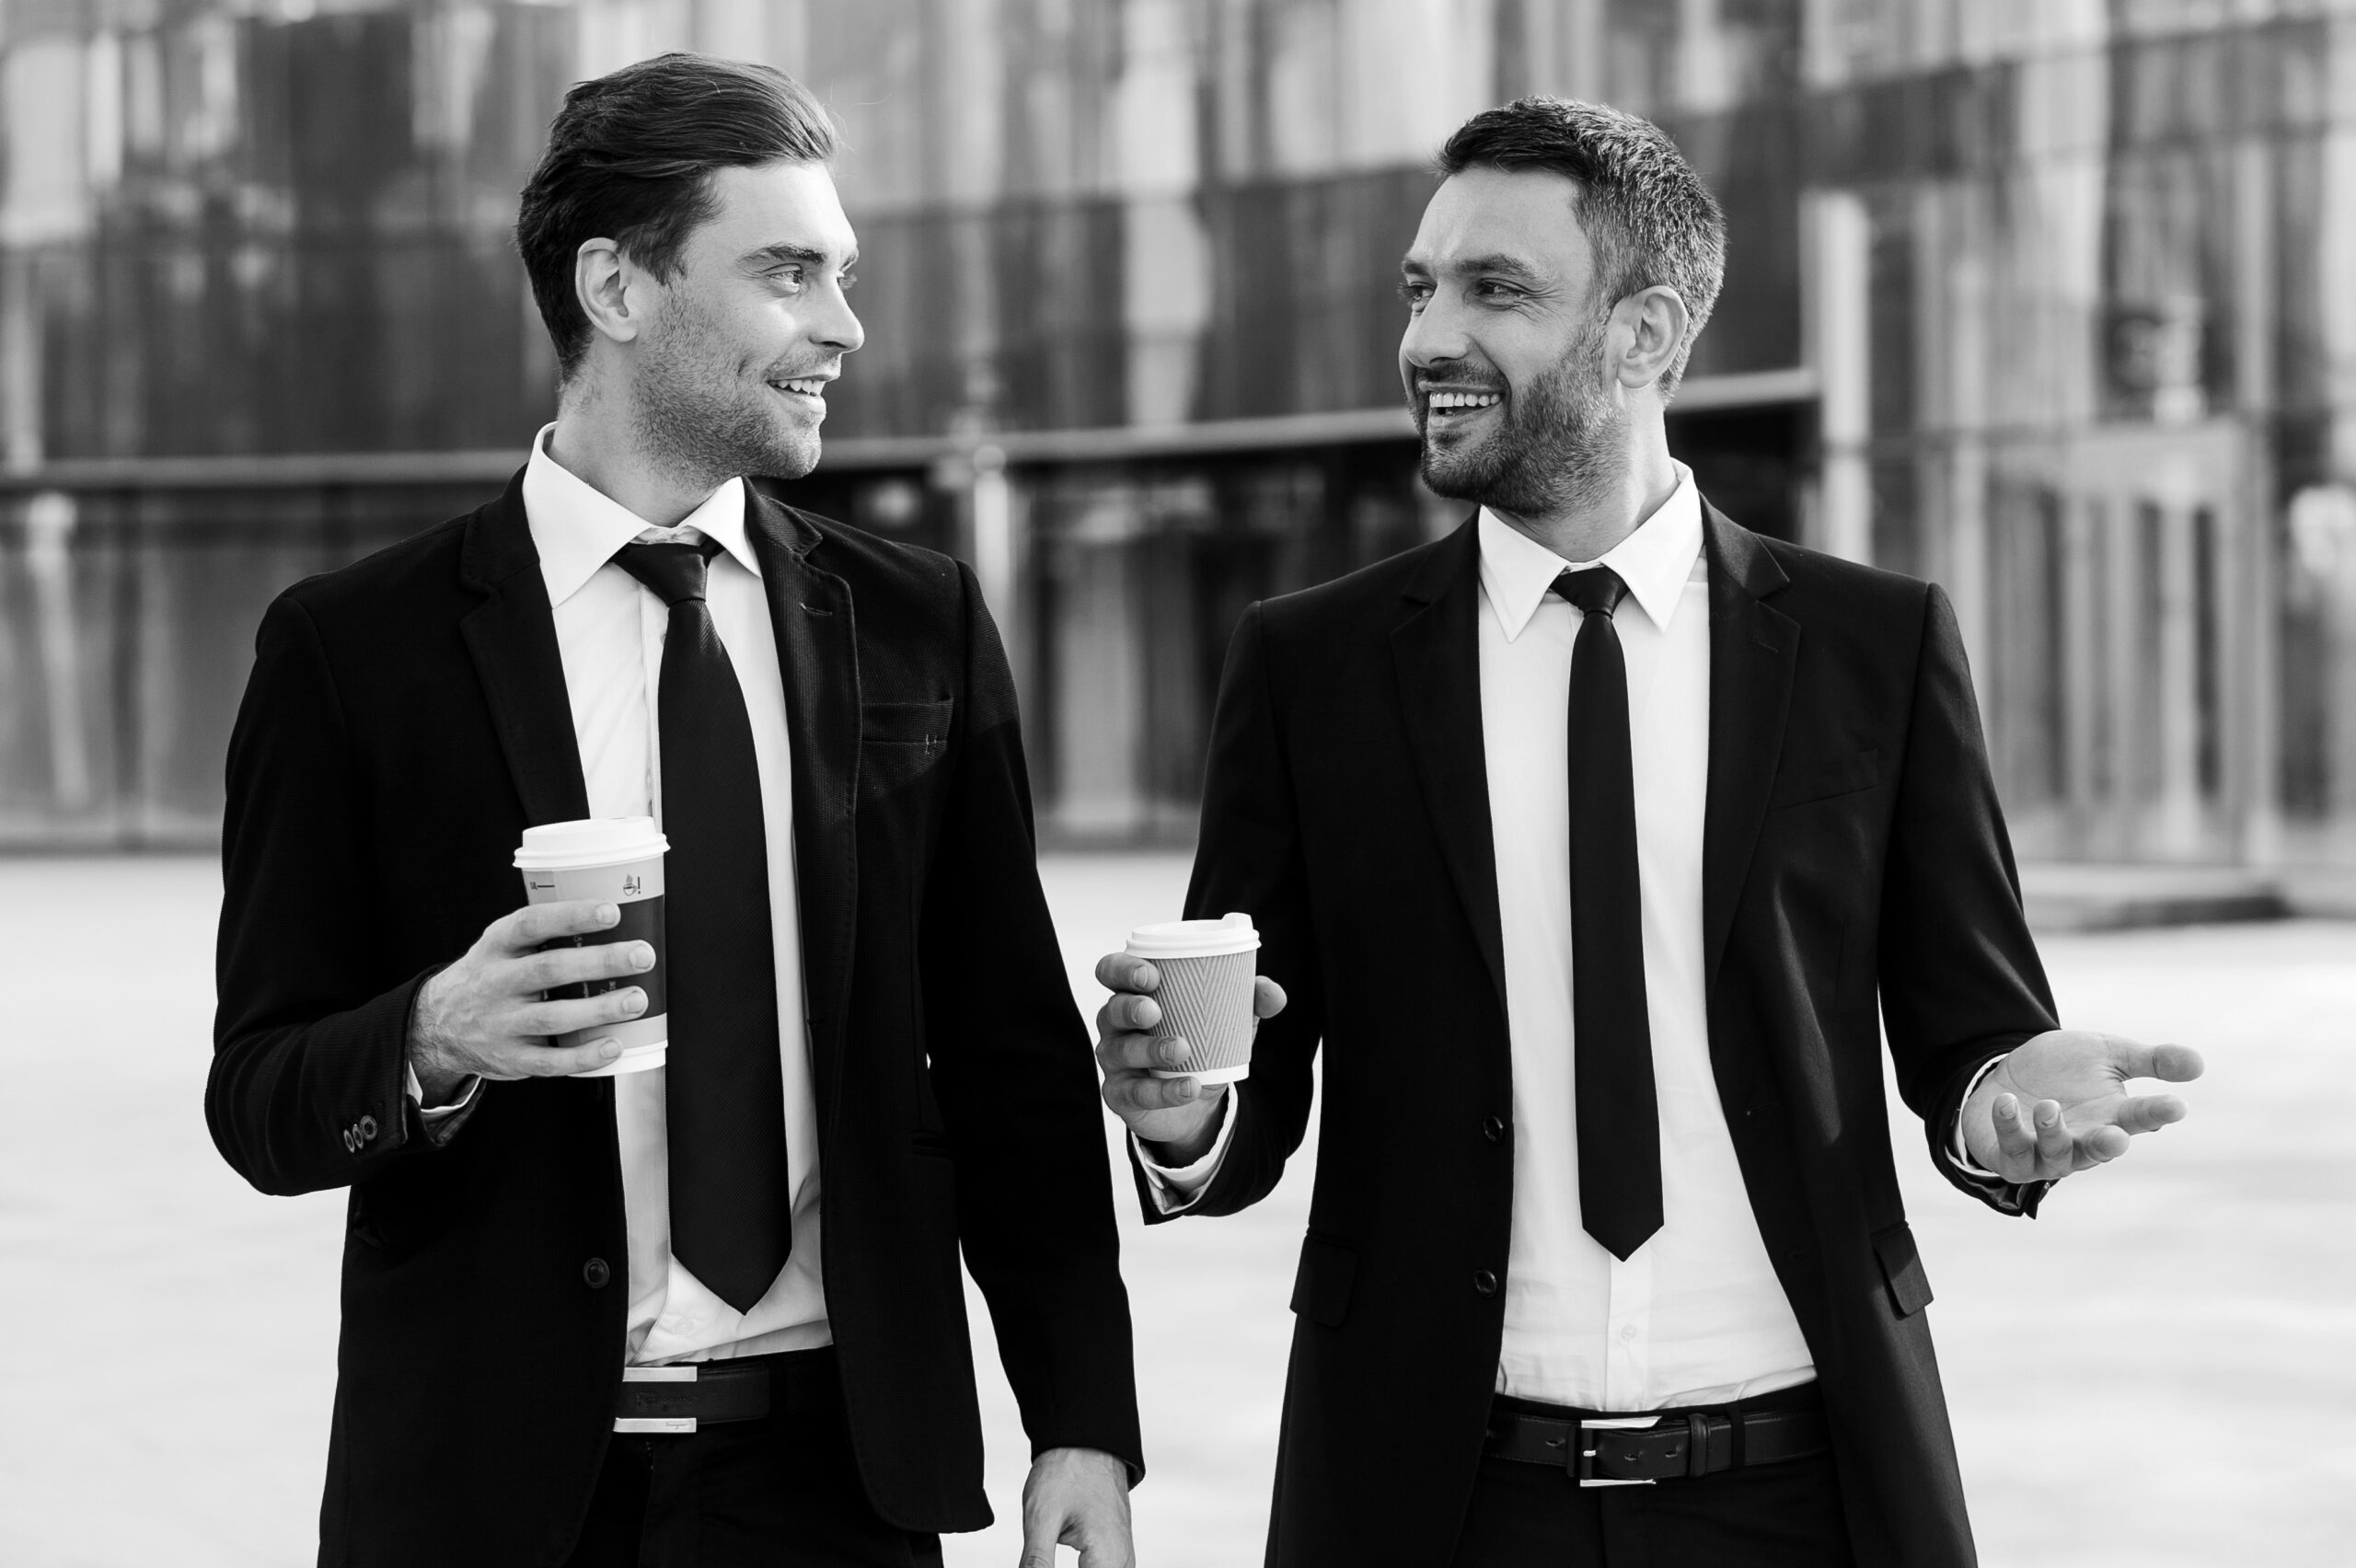 colleagues-friends-two-cheerful-businessmen-holding-cups-coffee-talking-each-other